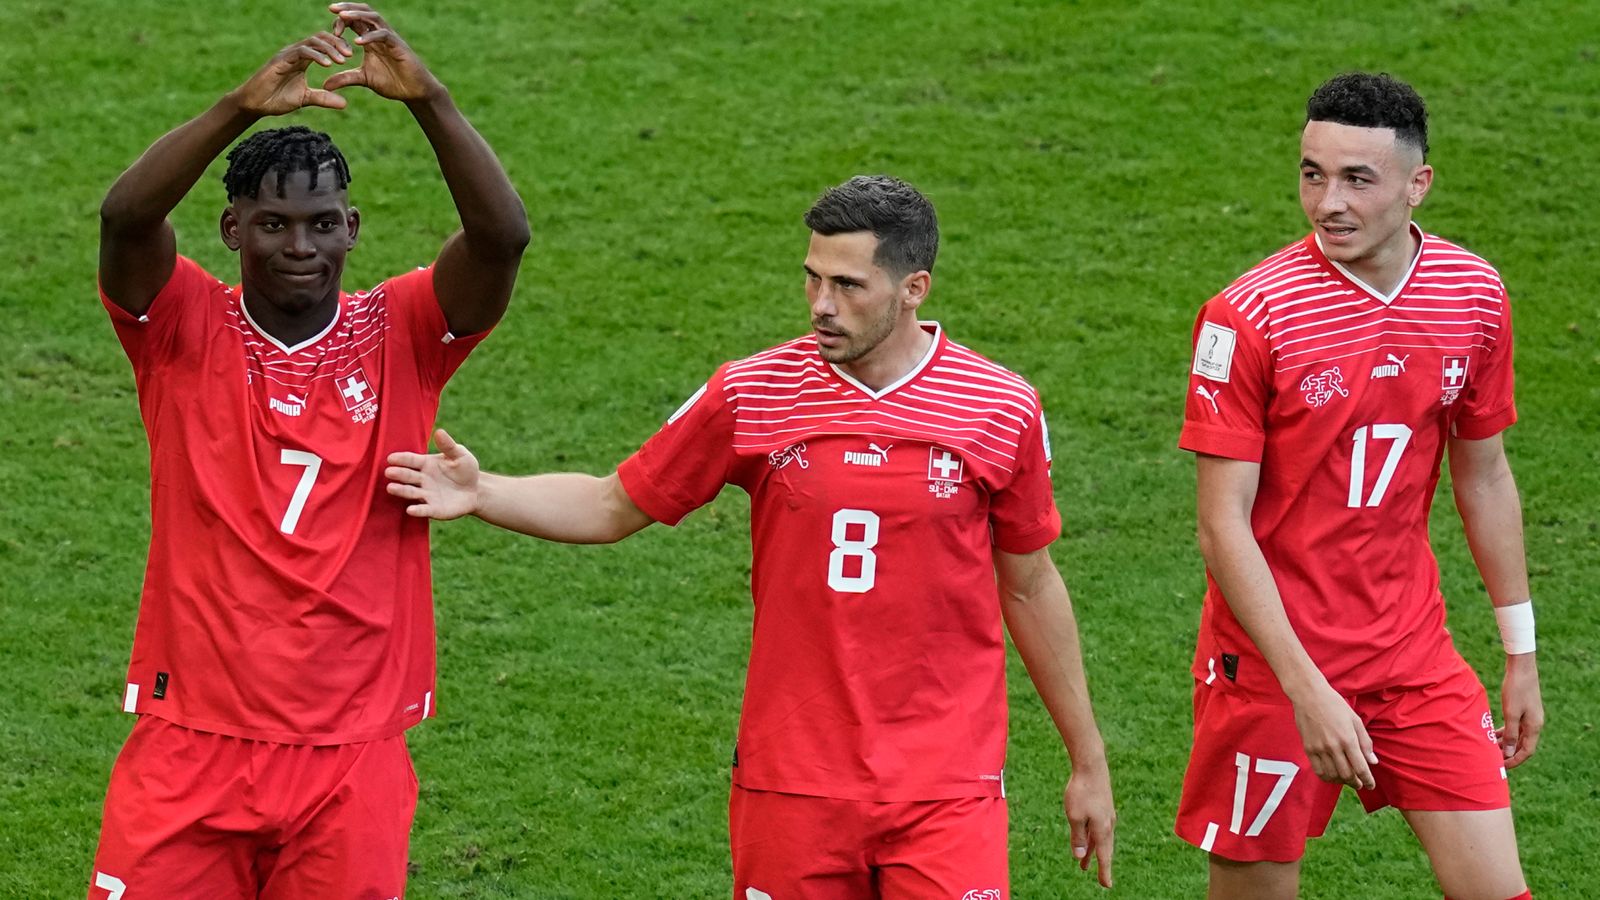 Switzerland 1-0 Cameroon: Breel Embolo secures Swiss victory in Group G opener but declines to celebrate against country of birth | Football News | Sky Sports